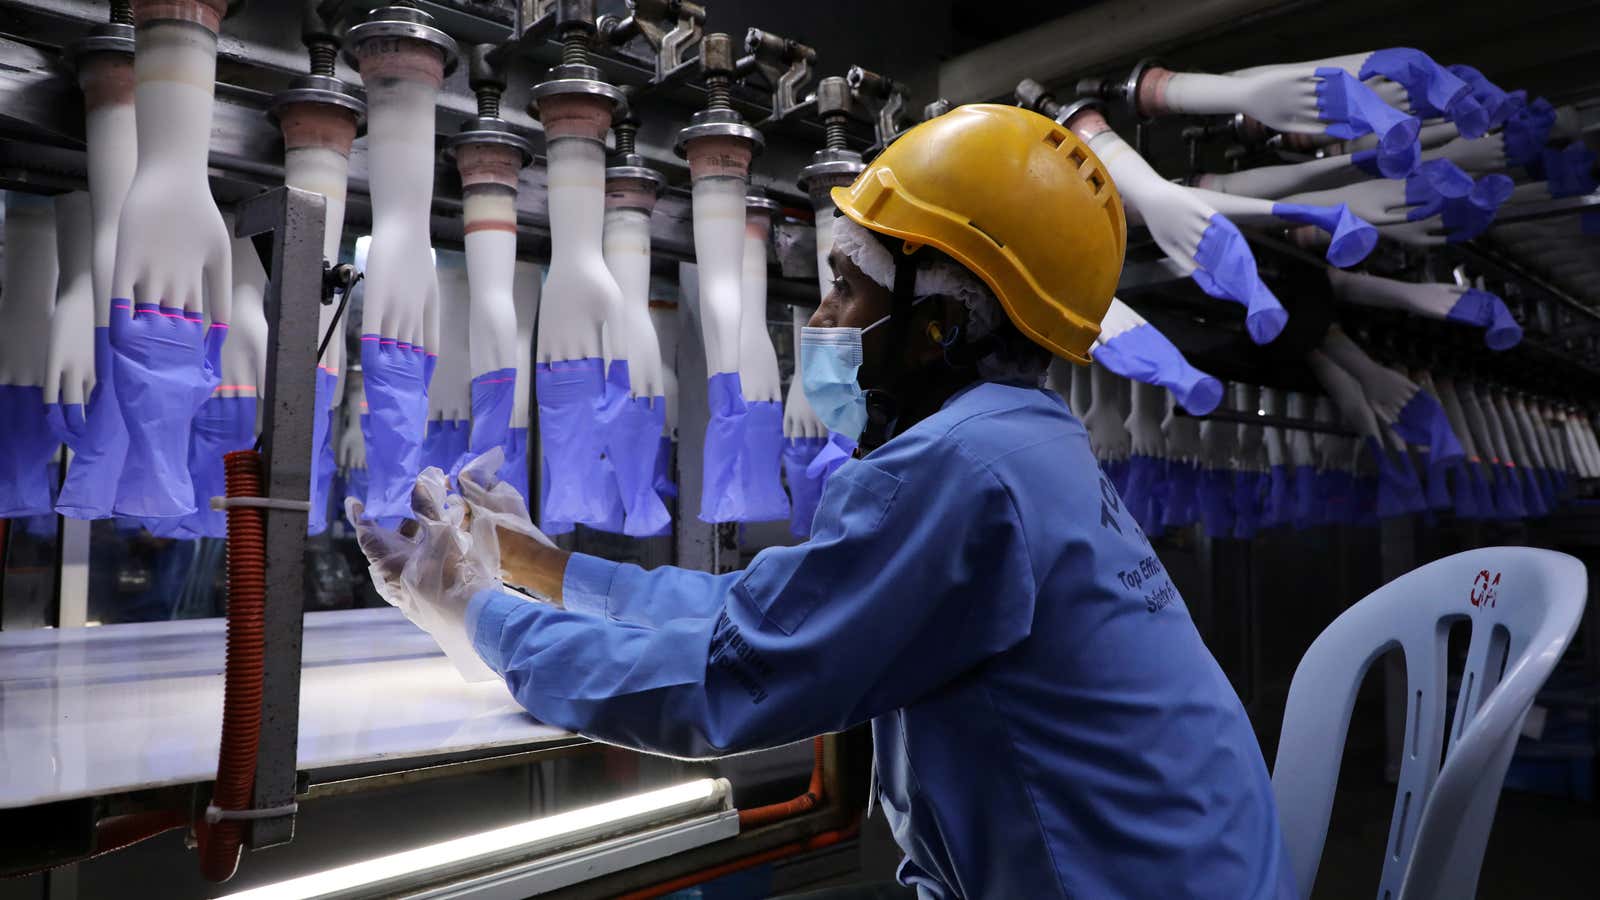 A worker inspects newly-made gloves at Top Glove factory in Shah Alam, Malaysia August 26, 2020. REUTERS/Lim Huey Teng